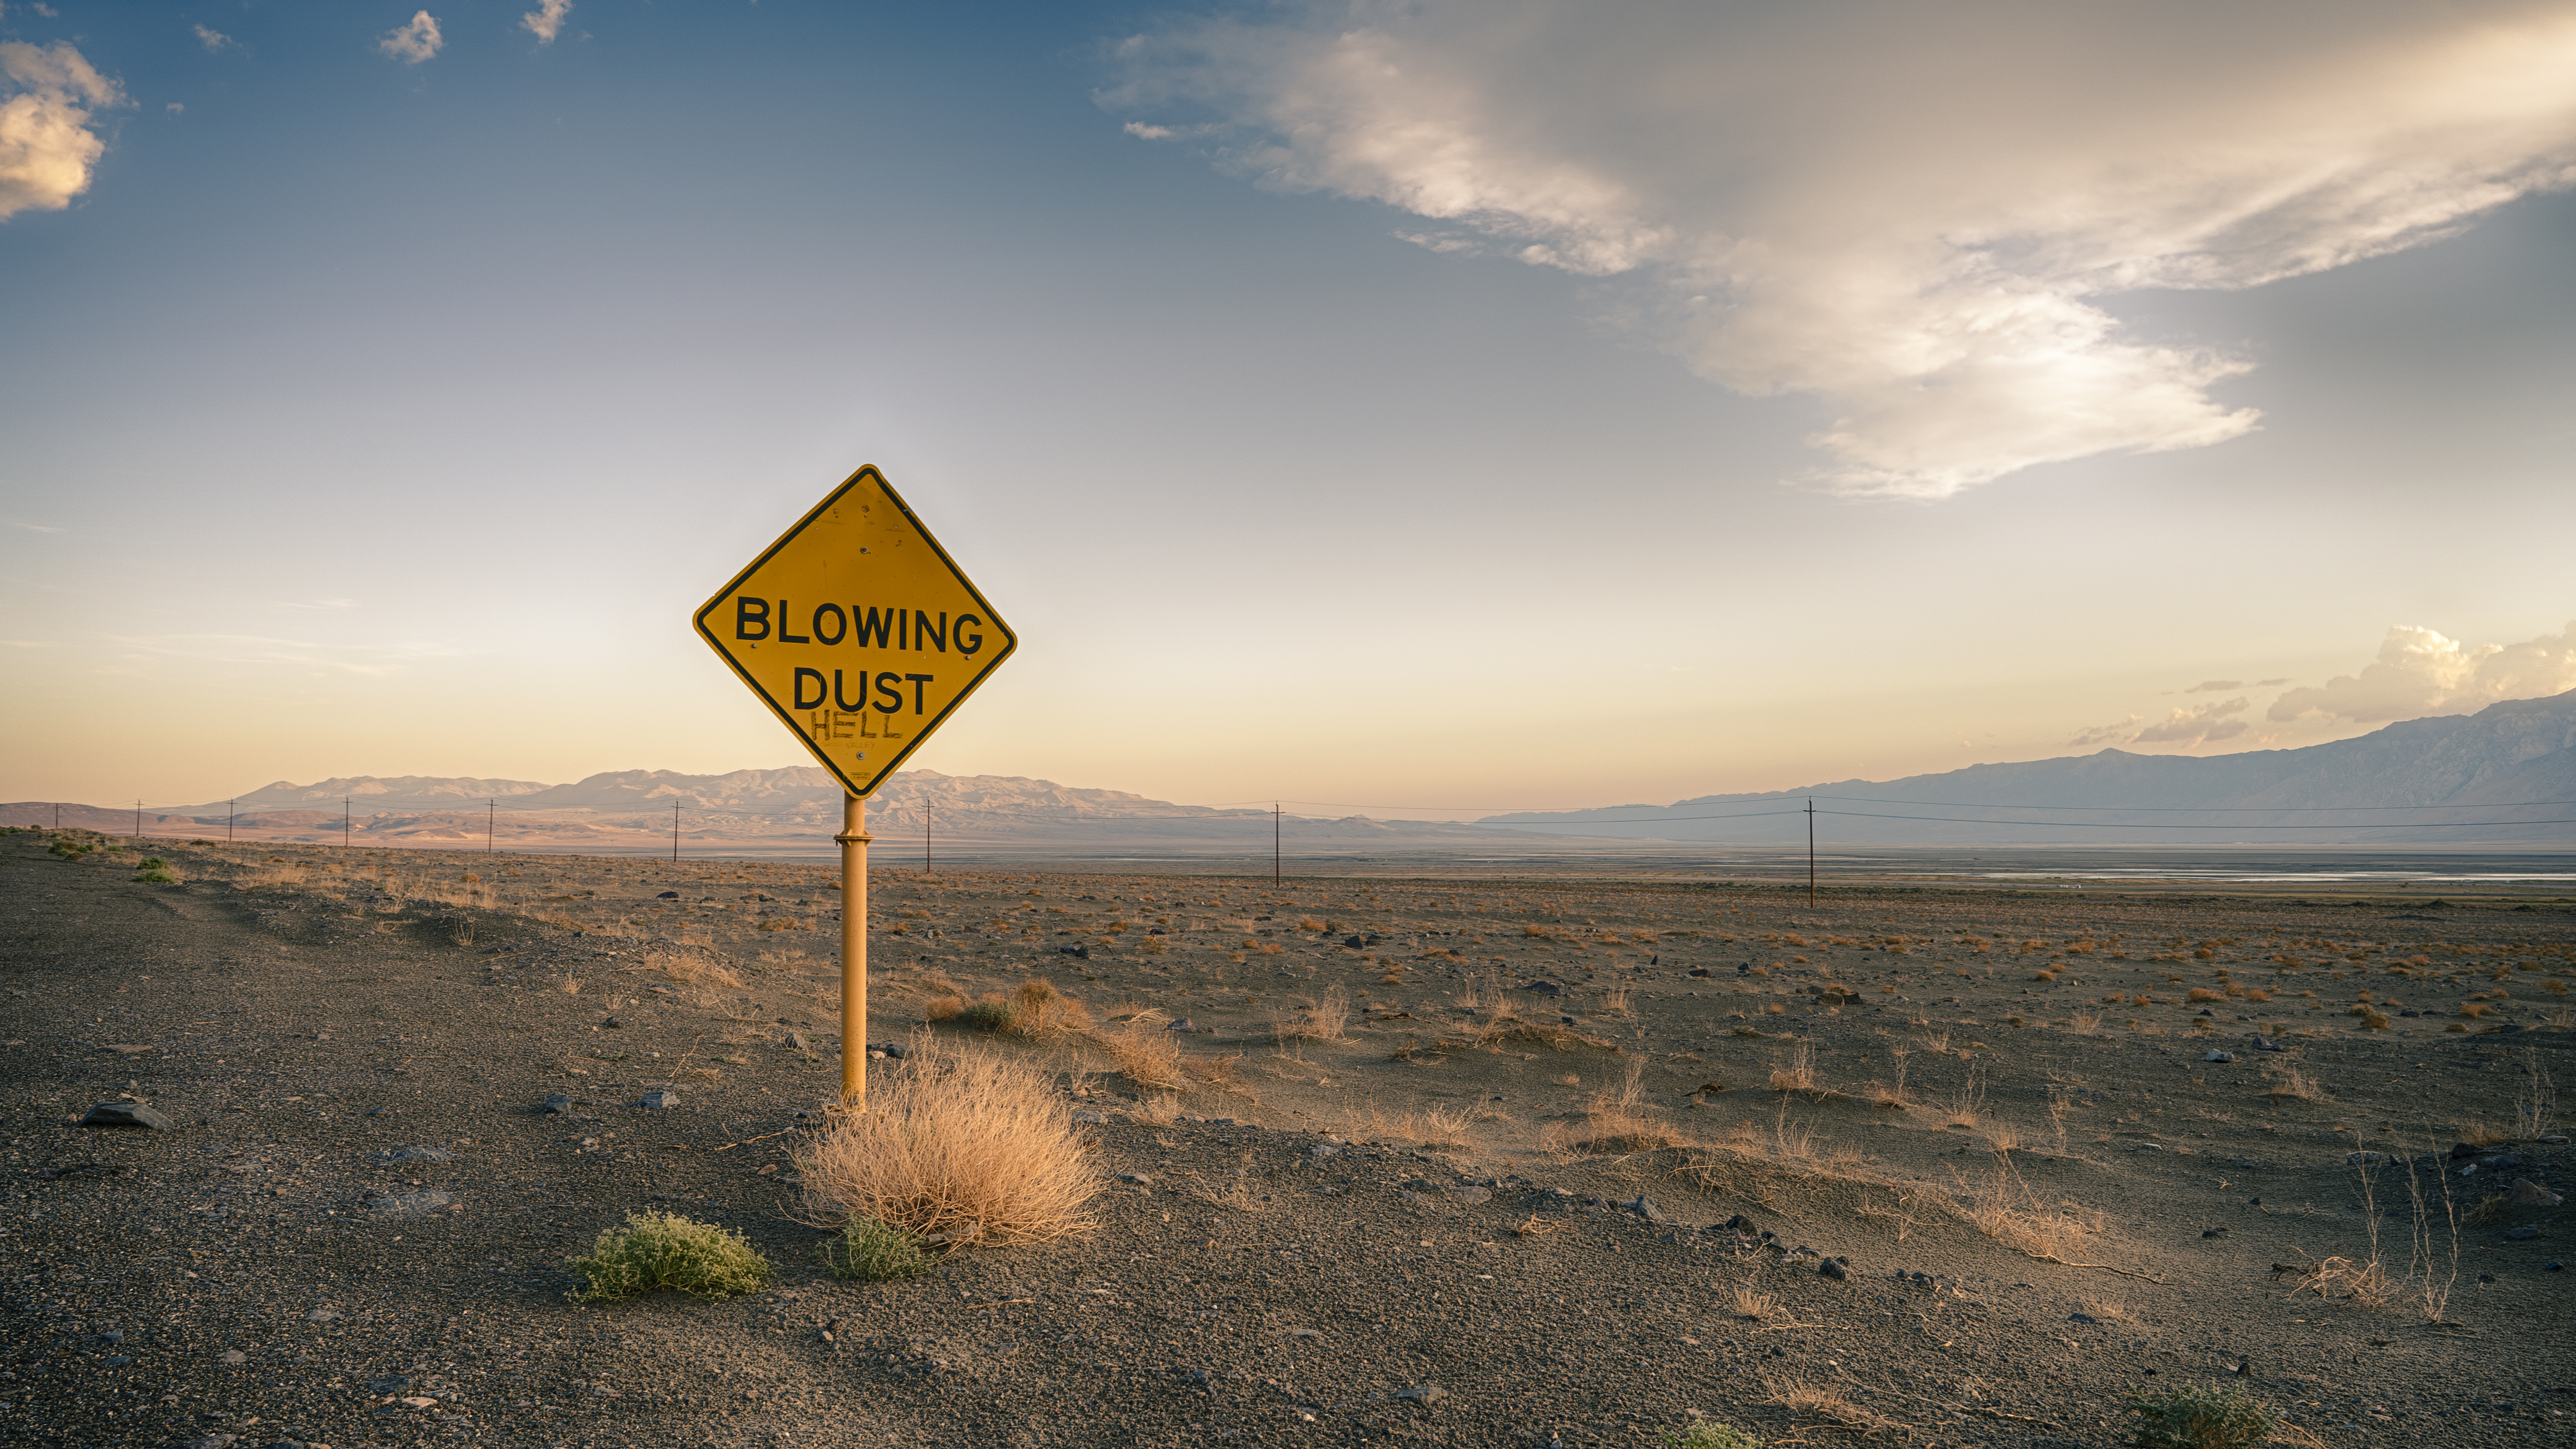 General 5764x3243 Owens Lake Owens Valley Sierra Nevada California dry lake road sign photography clouds dust sky signs mountains landscape USA